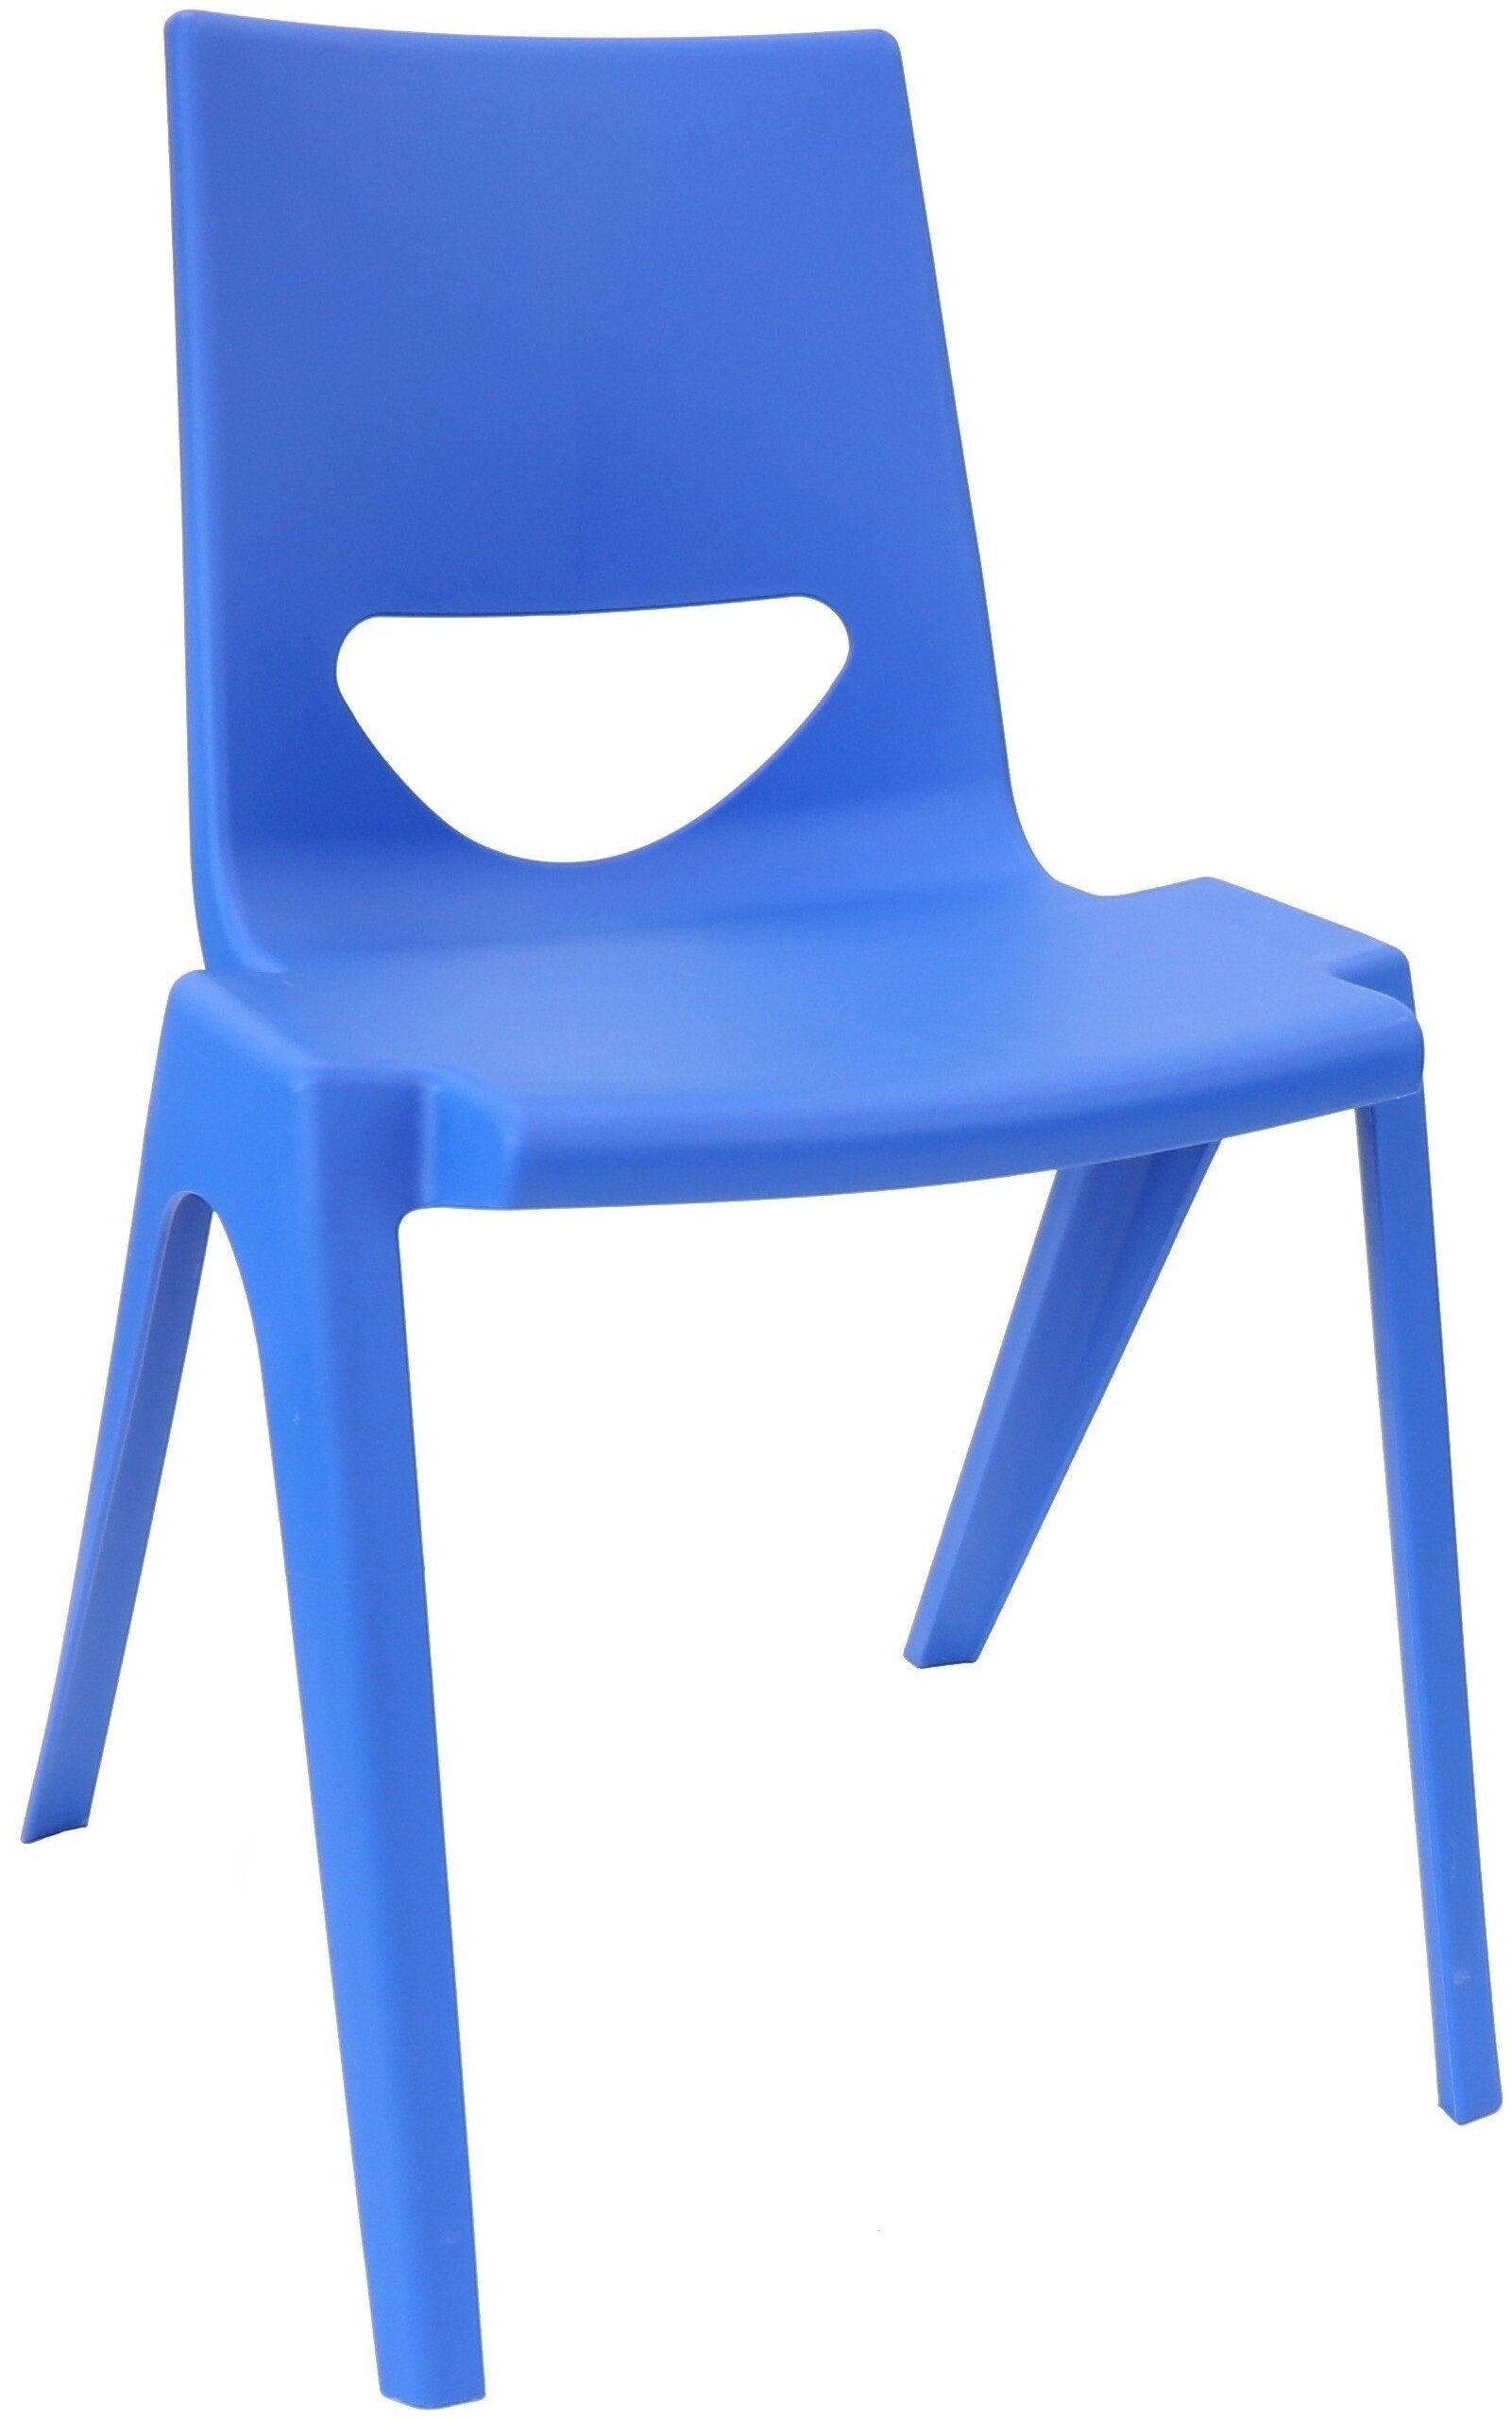 Chairs for School